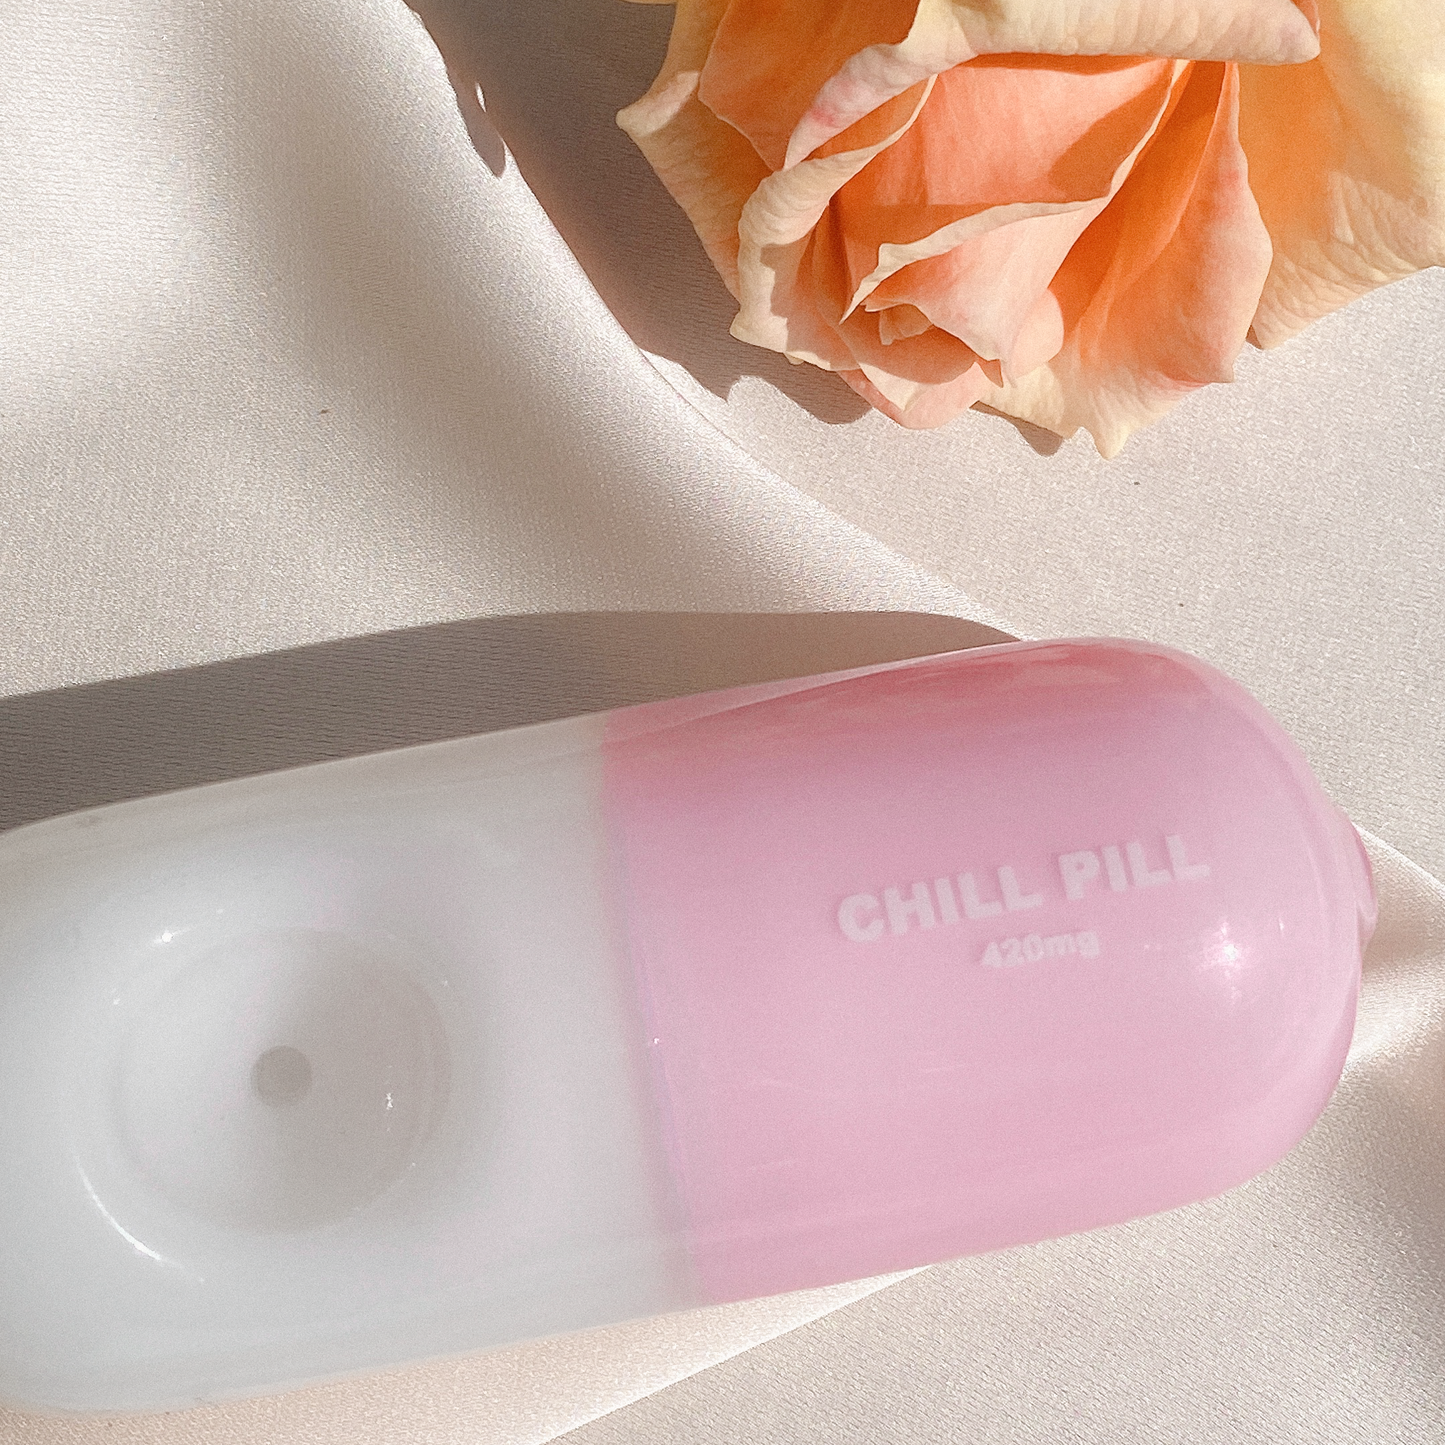 The Chill Pill Pipe